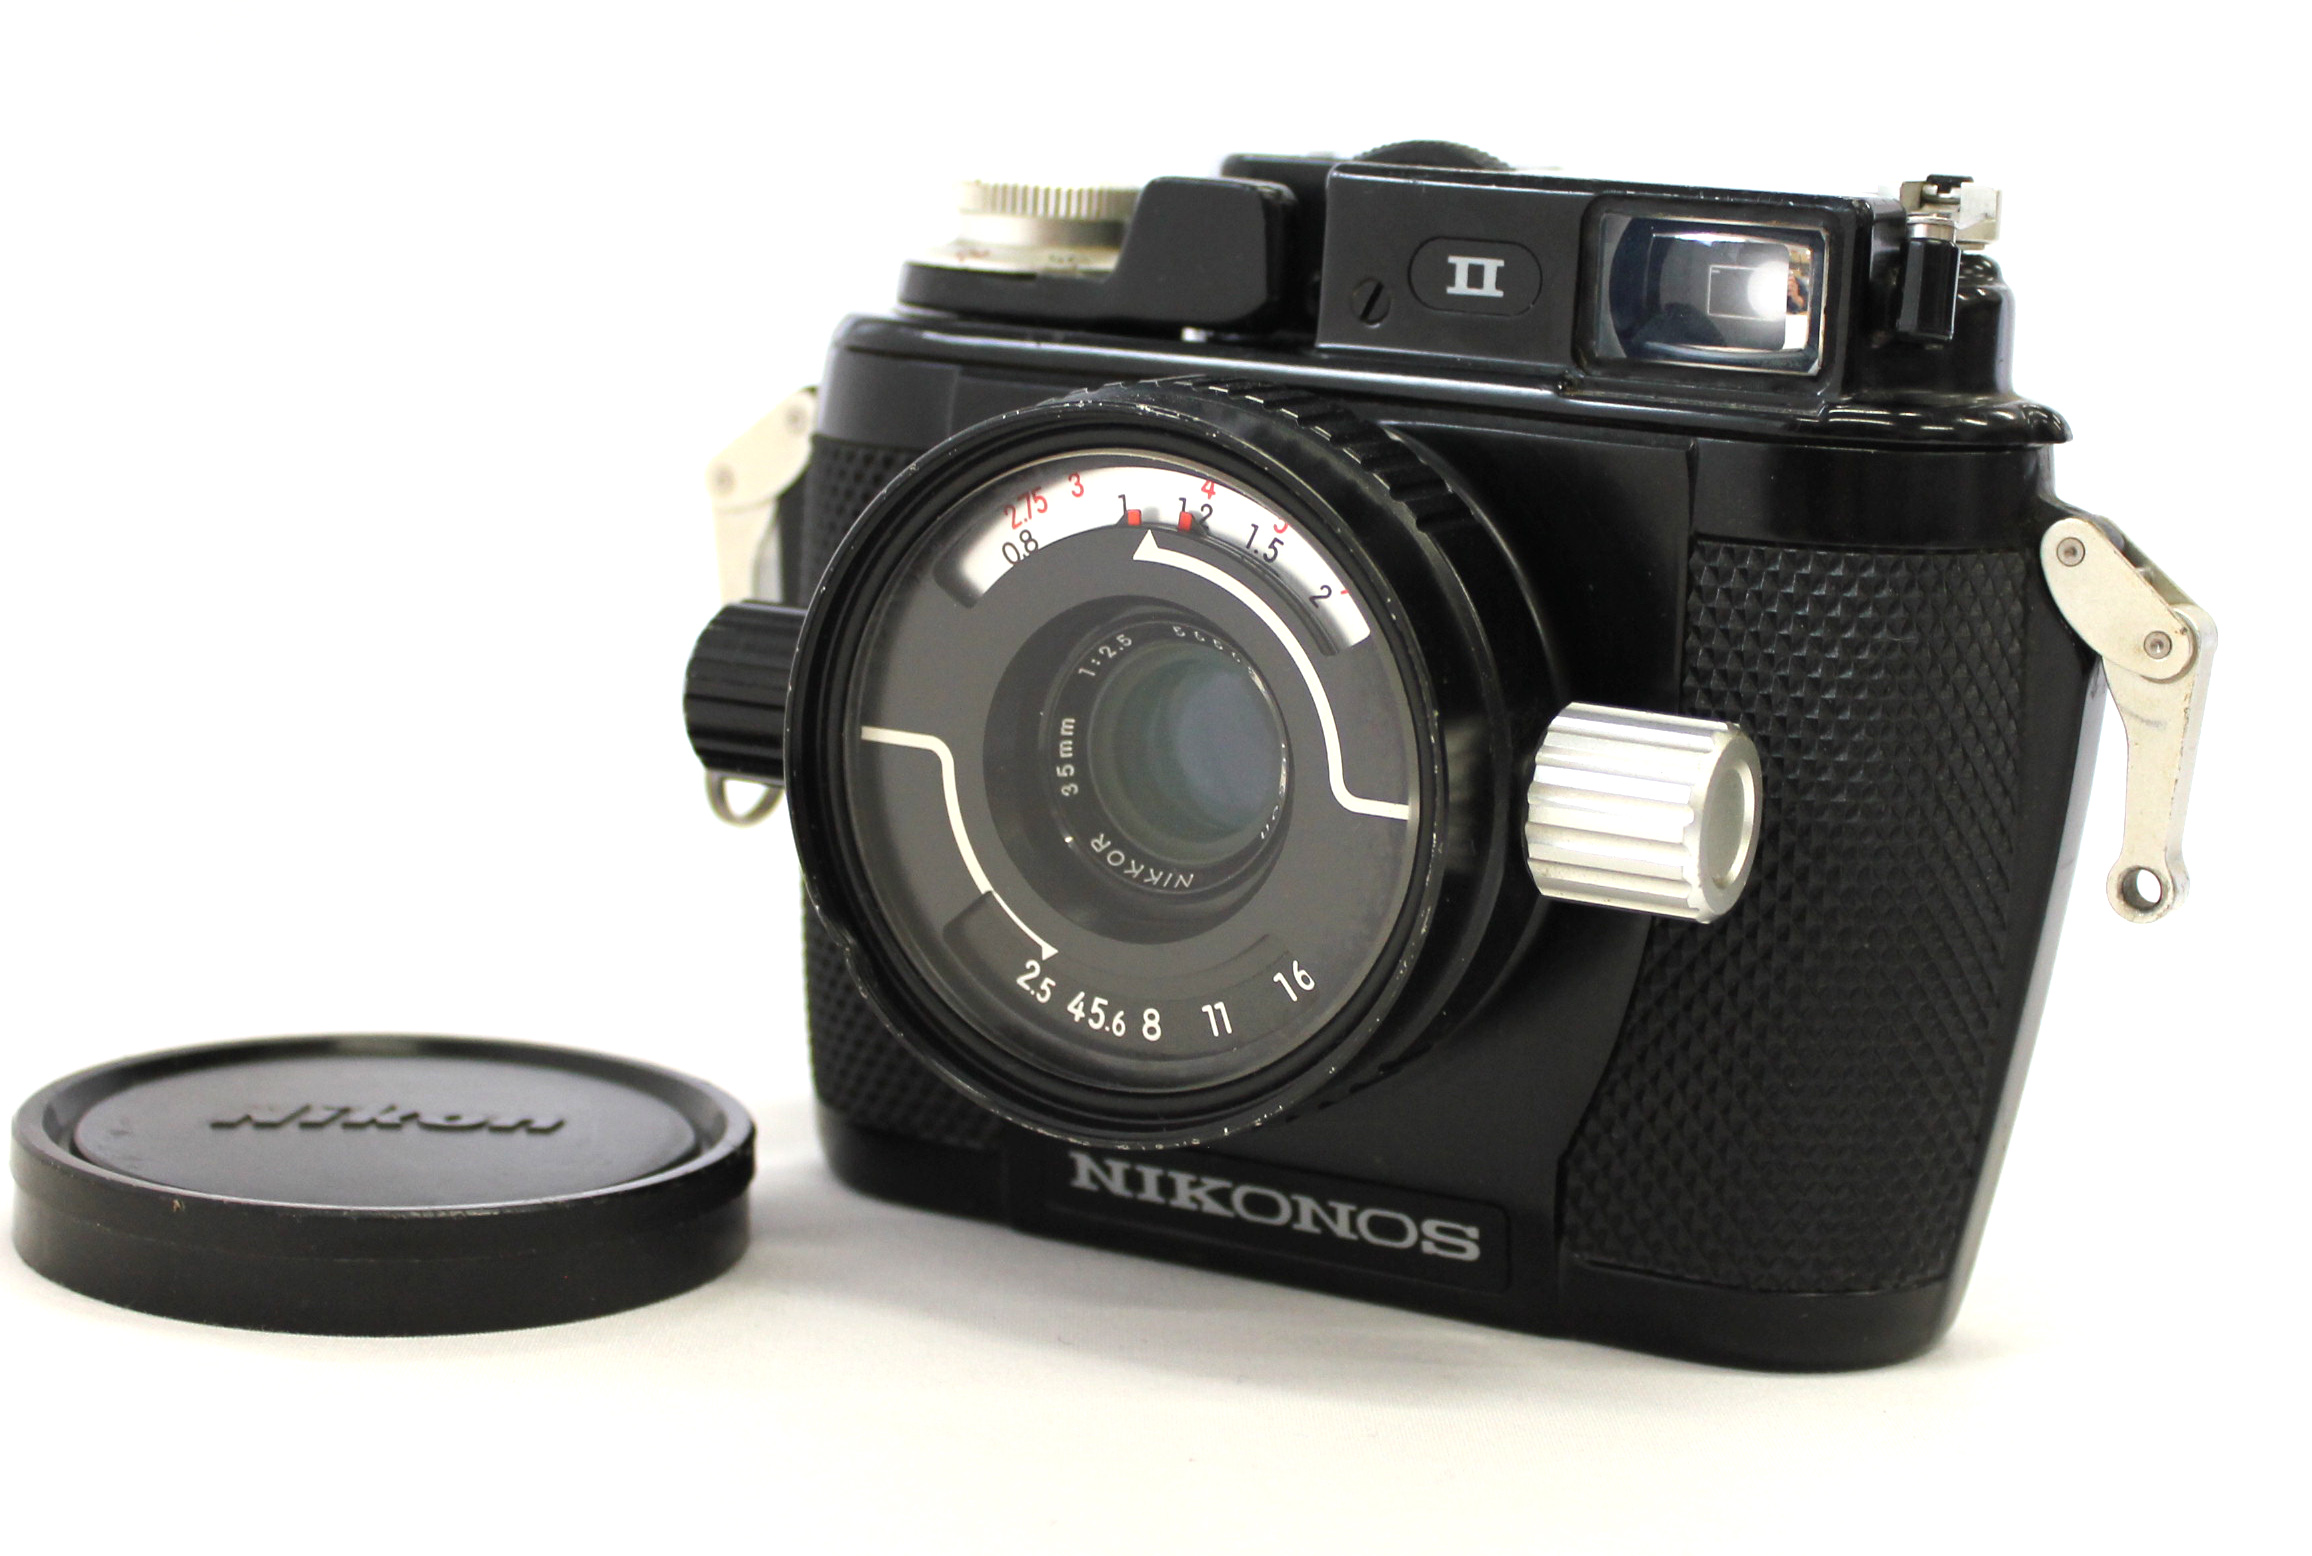 Japan Used Camera Shop | [Excellent++++] Nikon NIKONOS II Underwater Film Camera with 35mm F/2.5 Lens from Japan